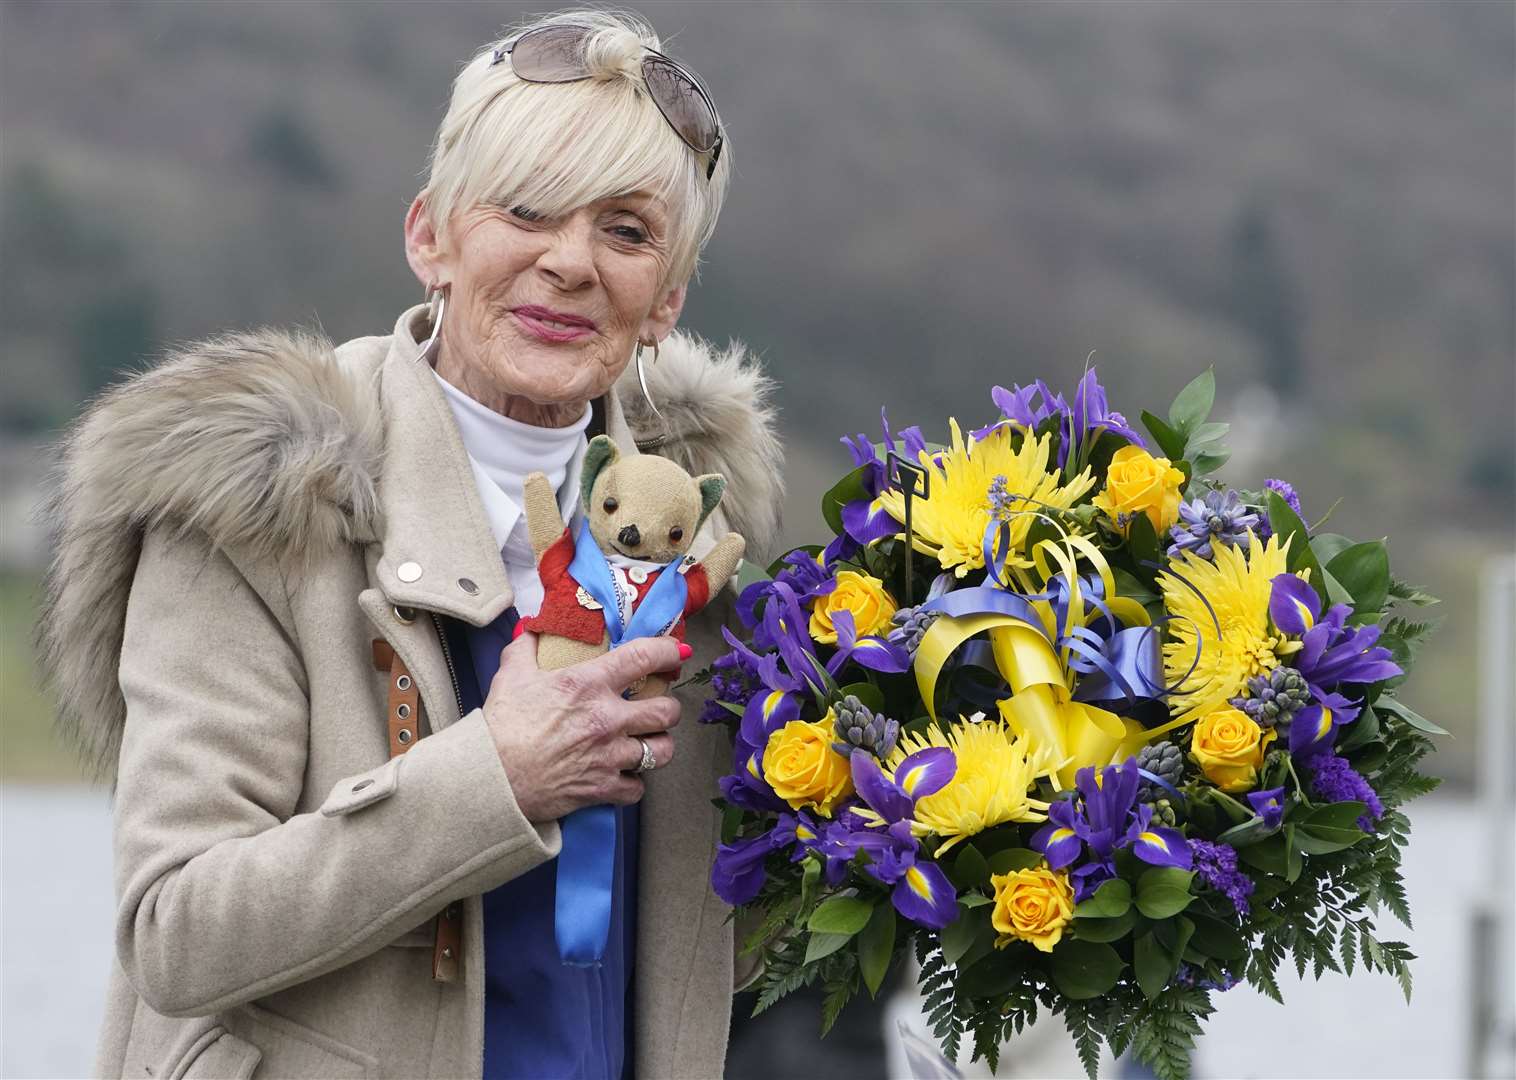 Gina Campbell, the daughter of Donald Campbell, holds a bunch of flowers at Coniston Water in 2021 to mark the 100th anniversary of his birth (Owen Humphreys/PA)